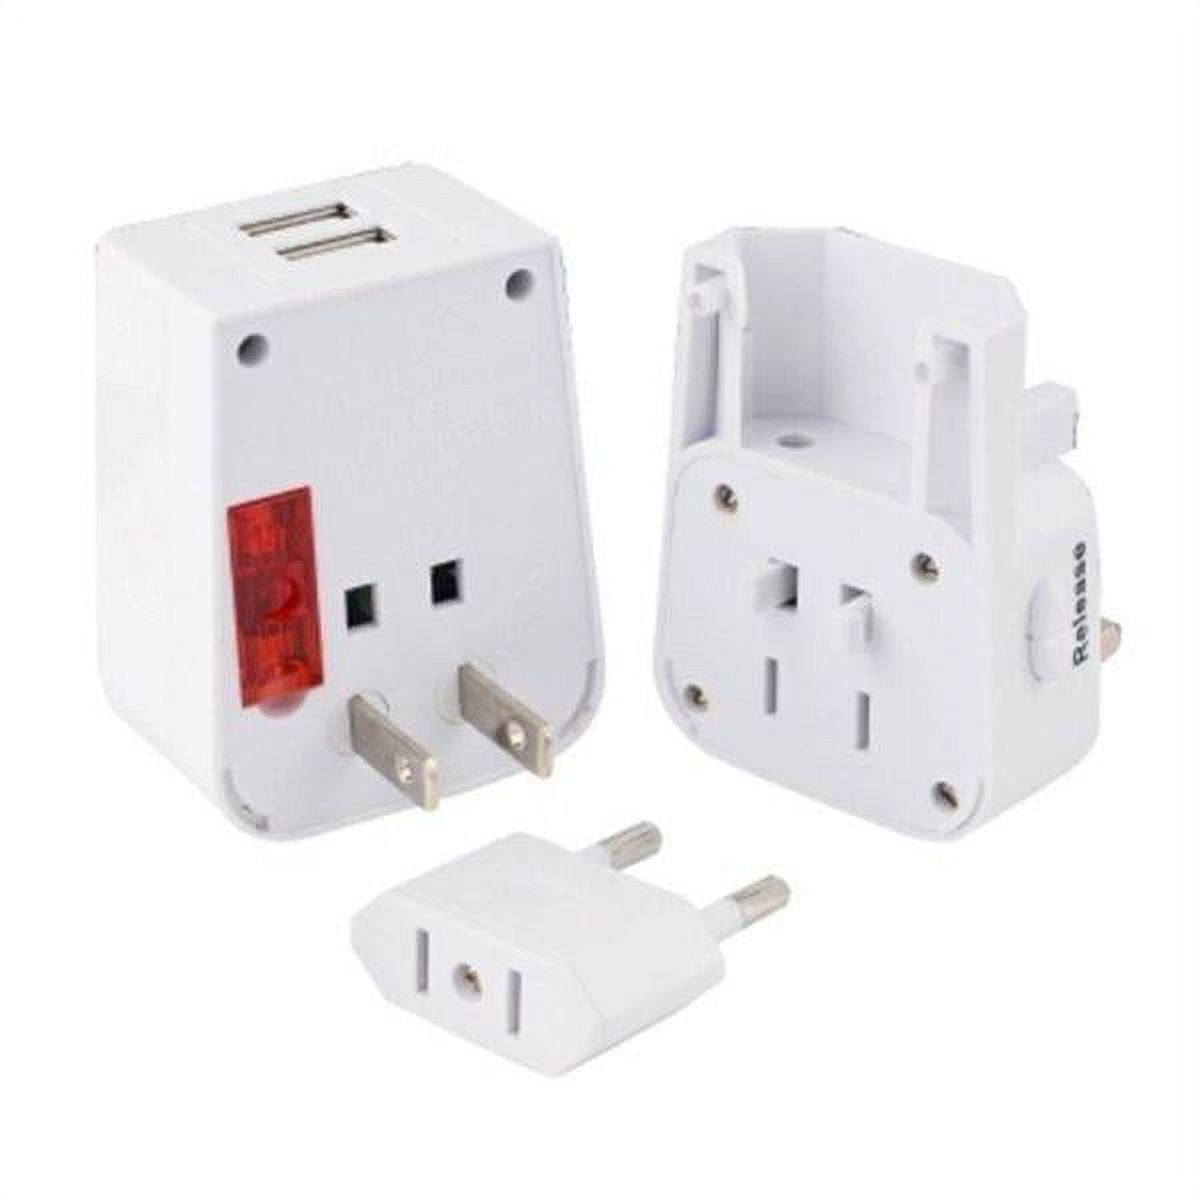 GENERIC Ceramic Universal Adapter With 2 Port USB Plug, For